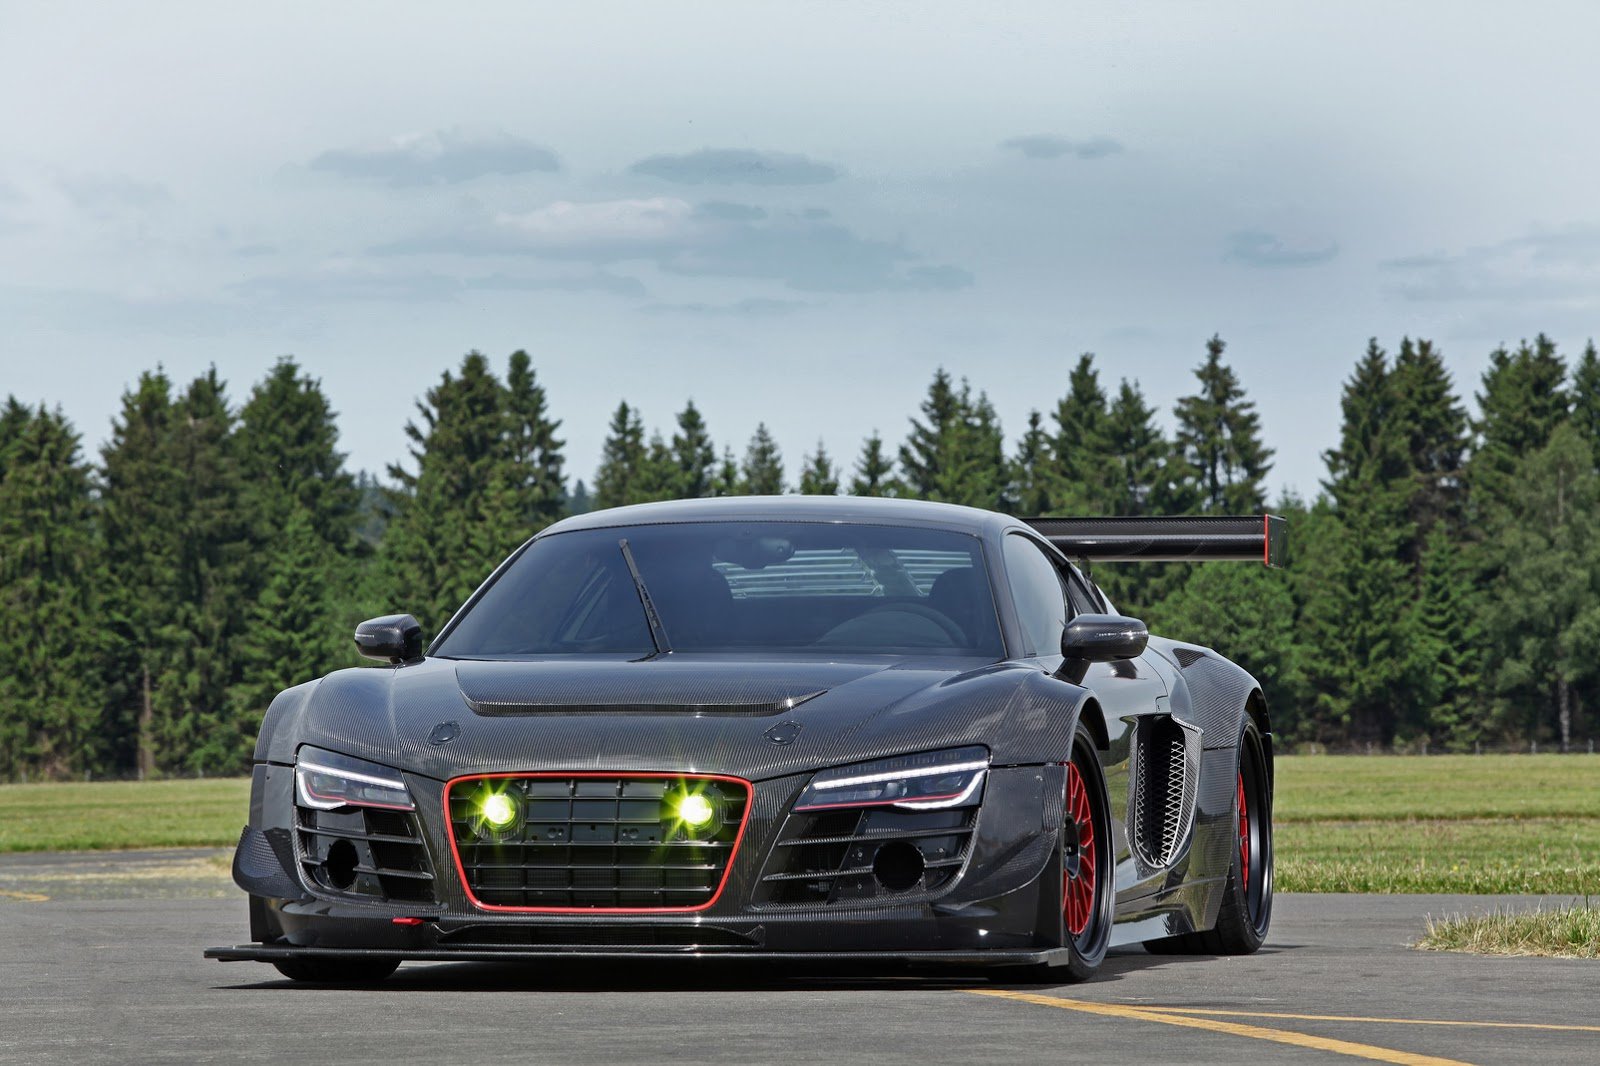 Audi R8 V10 Plus Widebody Cars Carbon Modified Wallpapers Hd